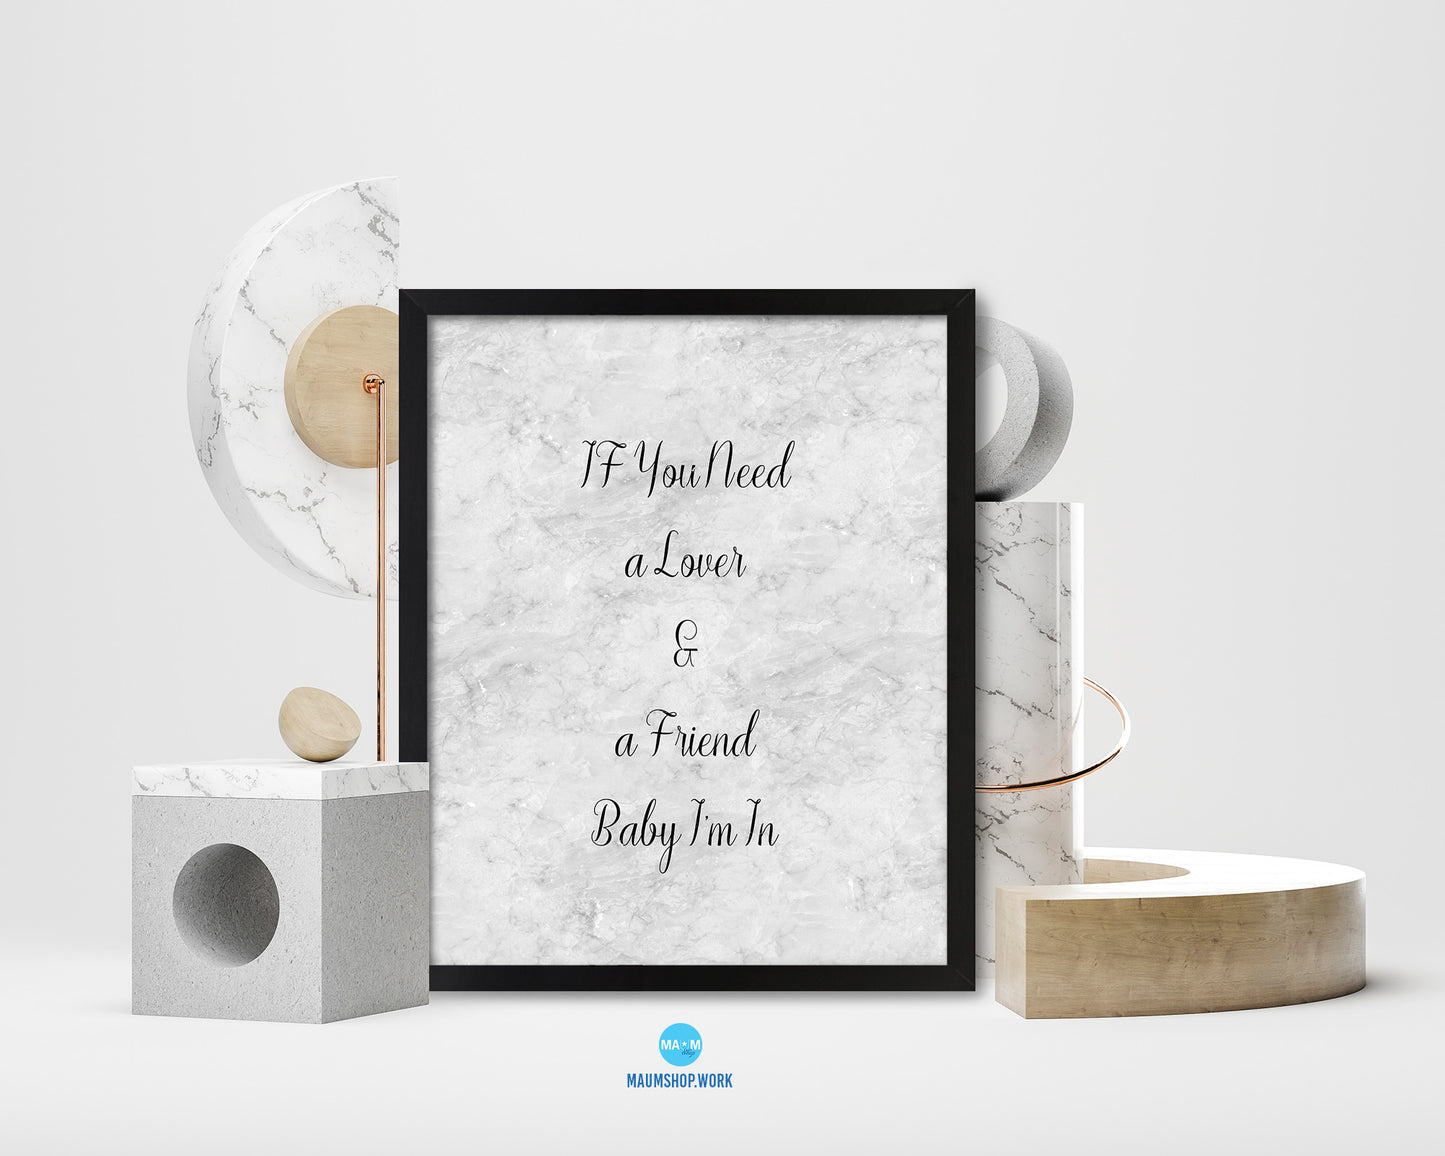 If you need a lover Quote Framed Print Wall Art Decor Gifts